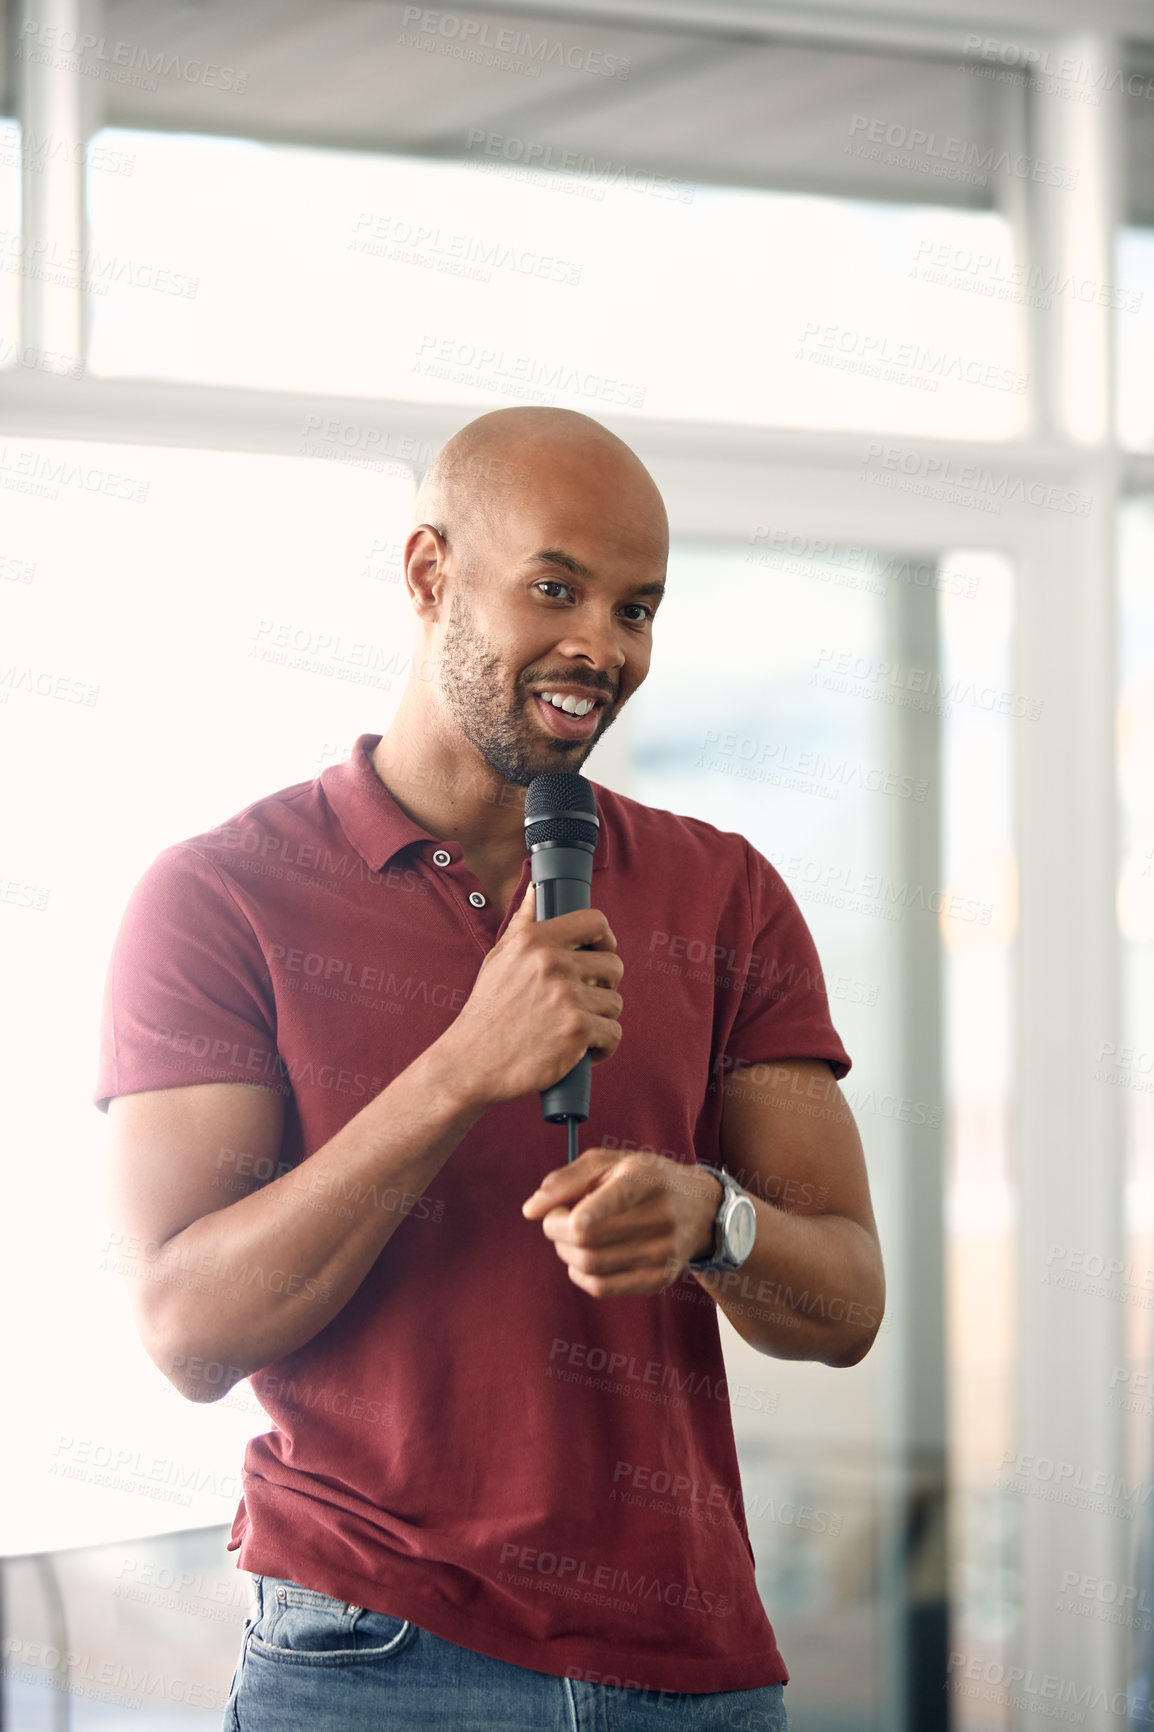 Buy stock photo Cropped shot of a handsome young man speaking over a microphone